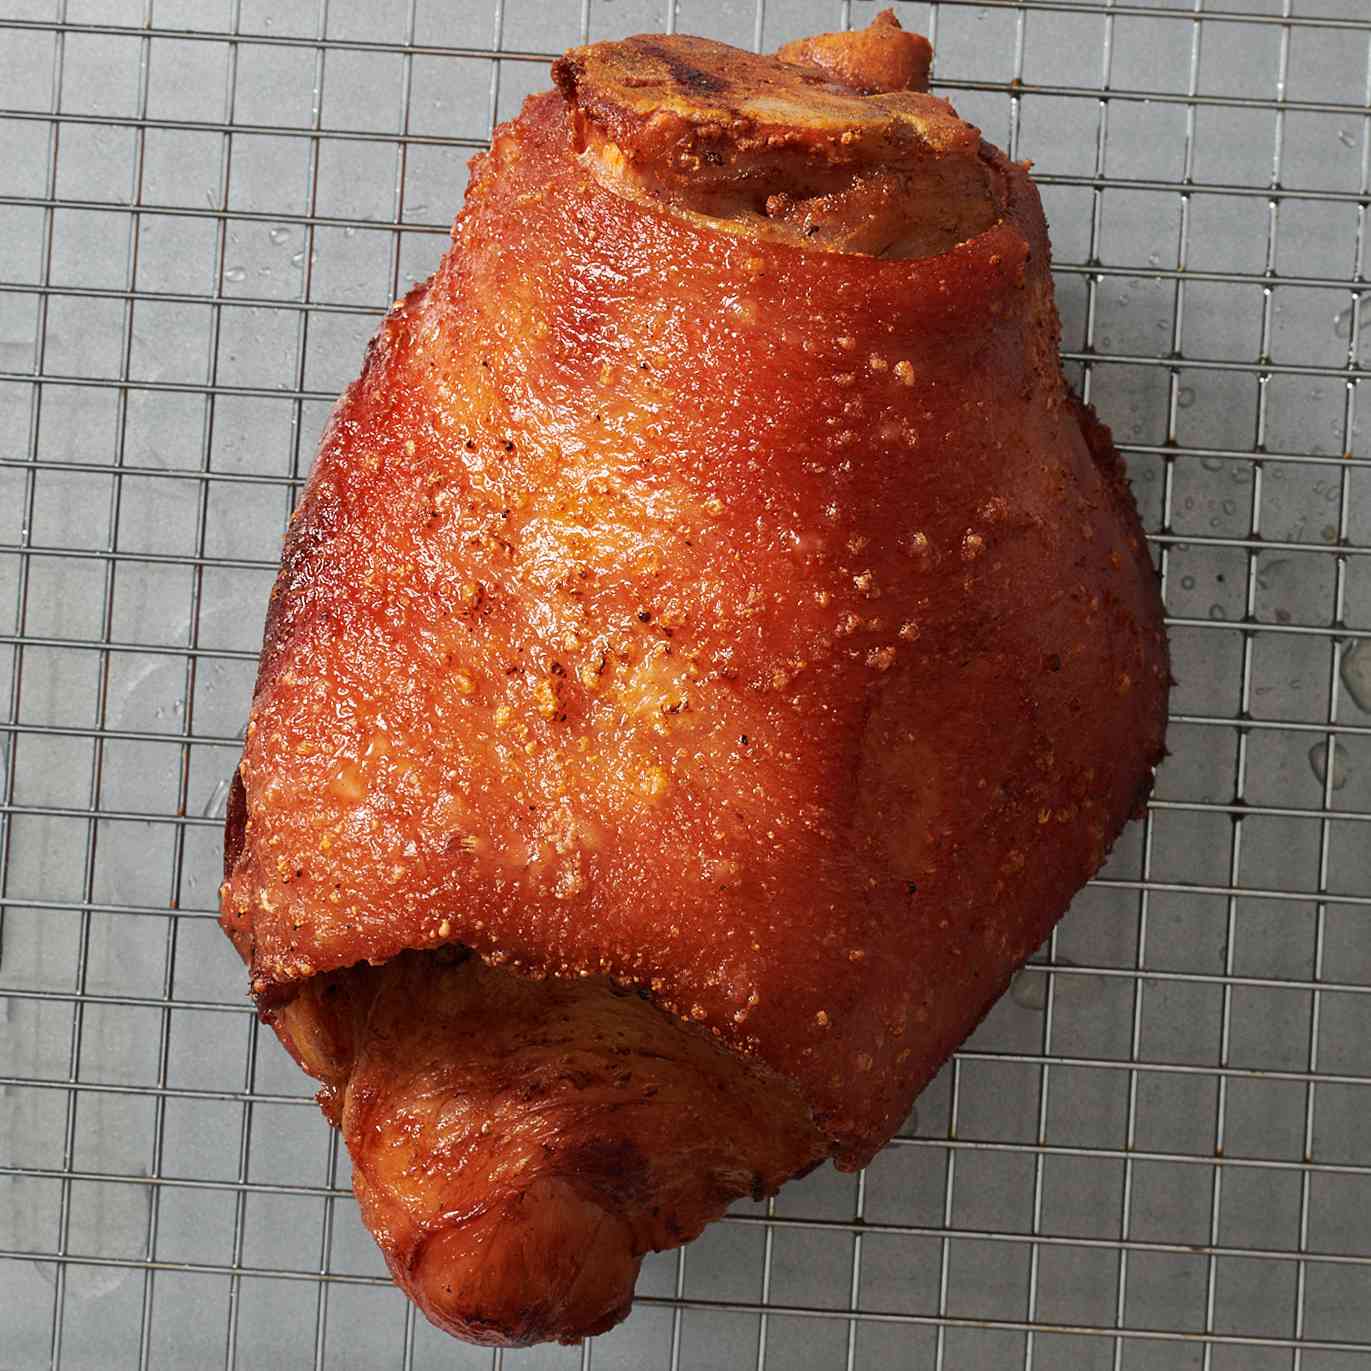 A golden brown fried ham hock on a wire rack